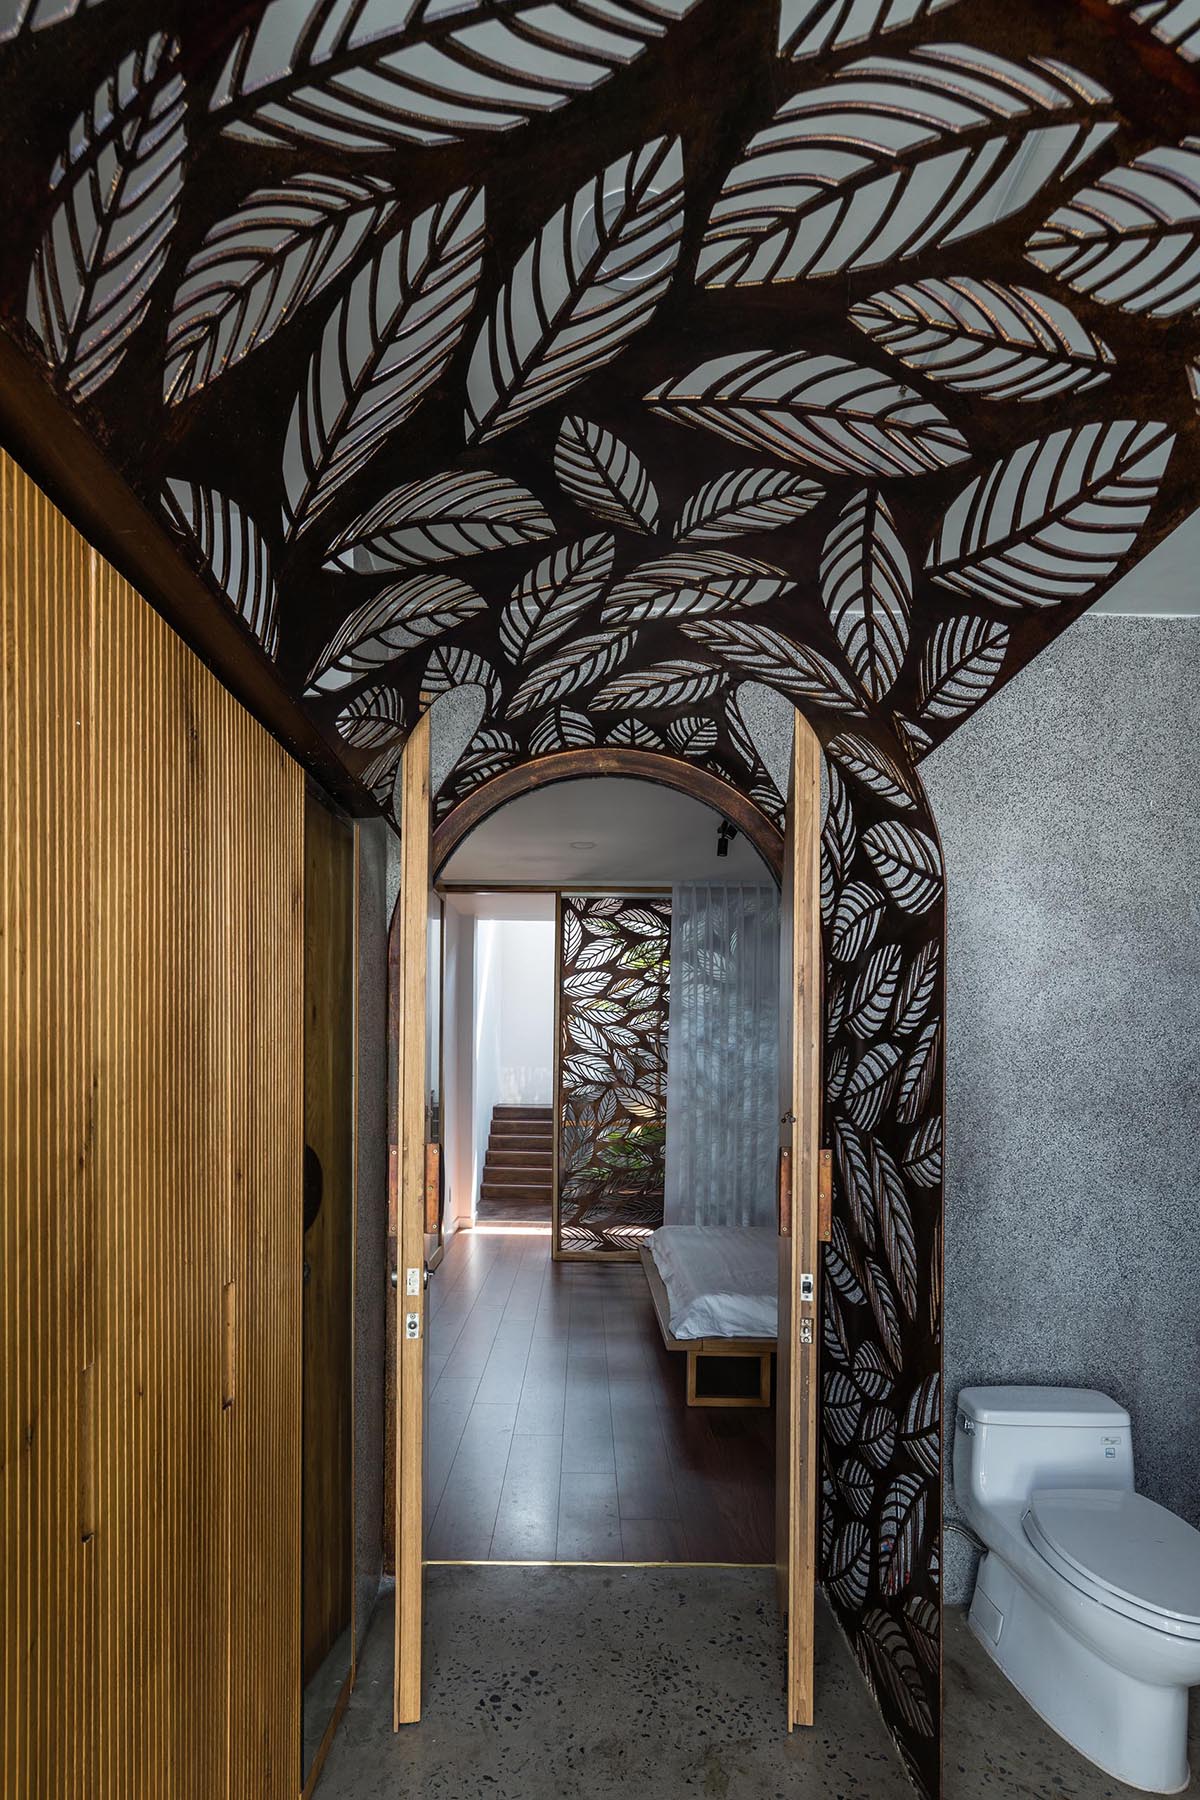 In this modern bathrooms, a decorative metal screen with a leaf motif has been used as a backdrop for vanity and as a way to highlight the doorway.